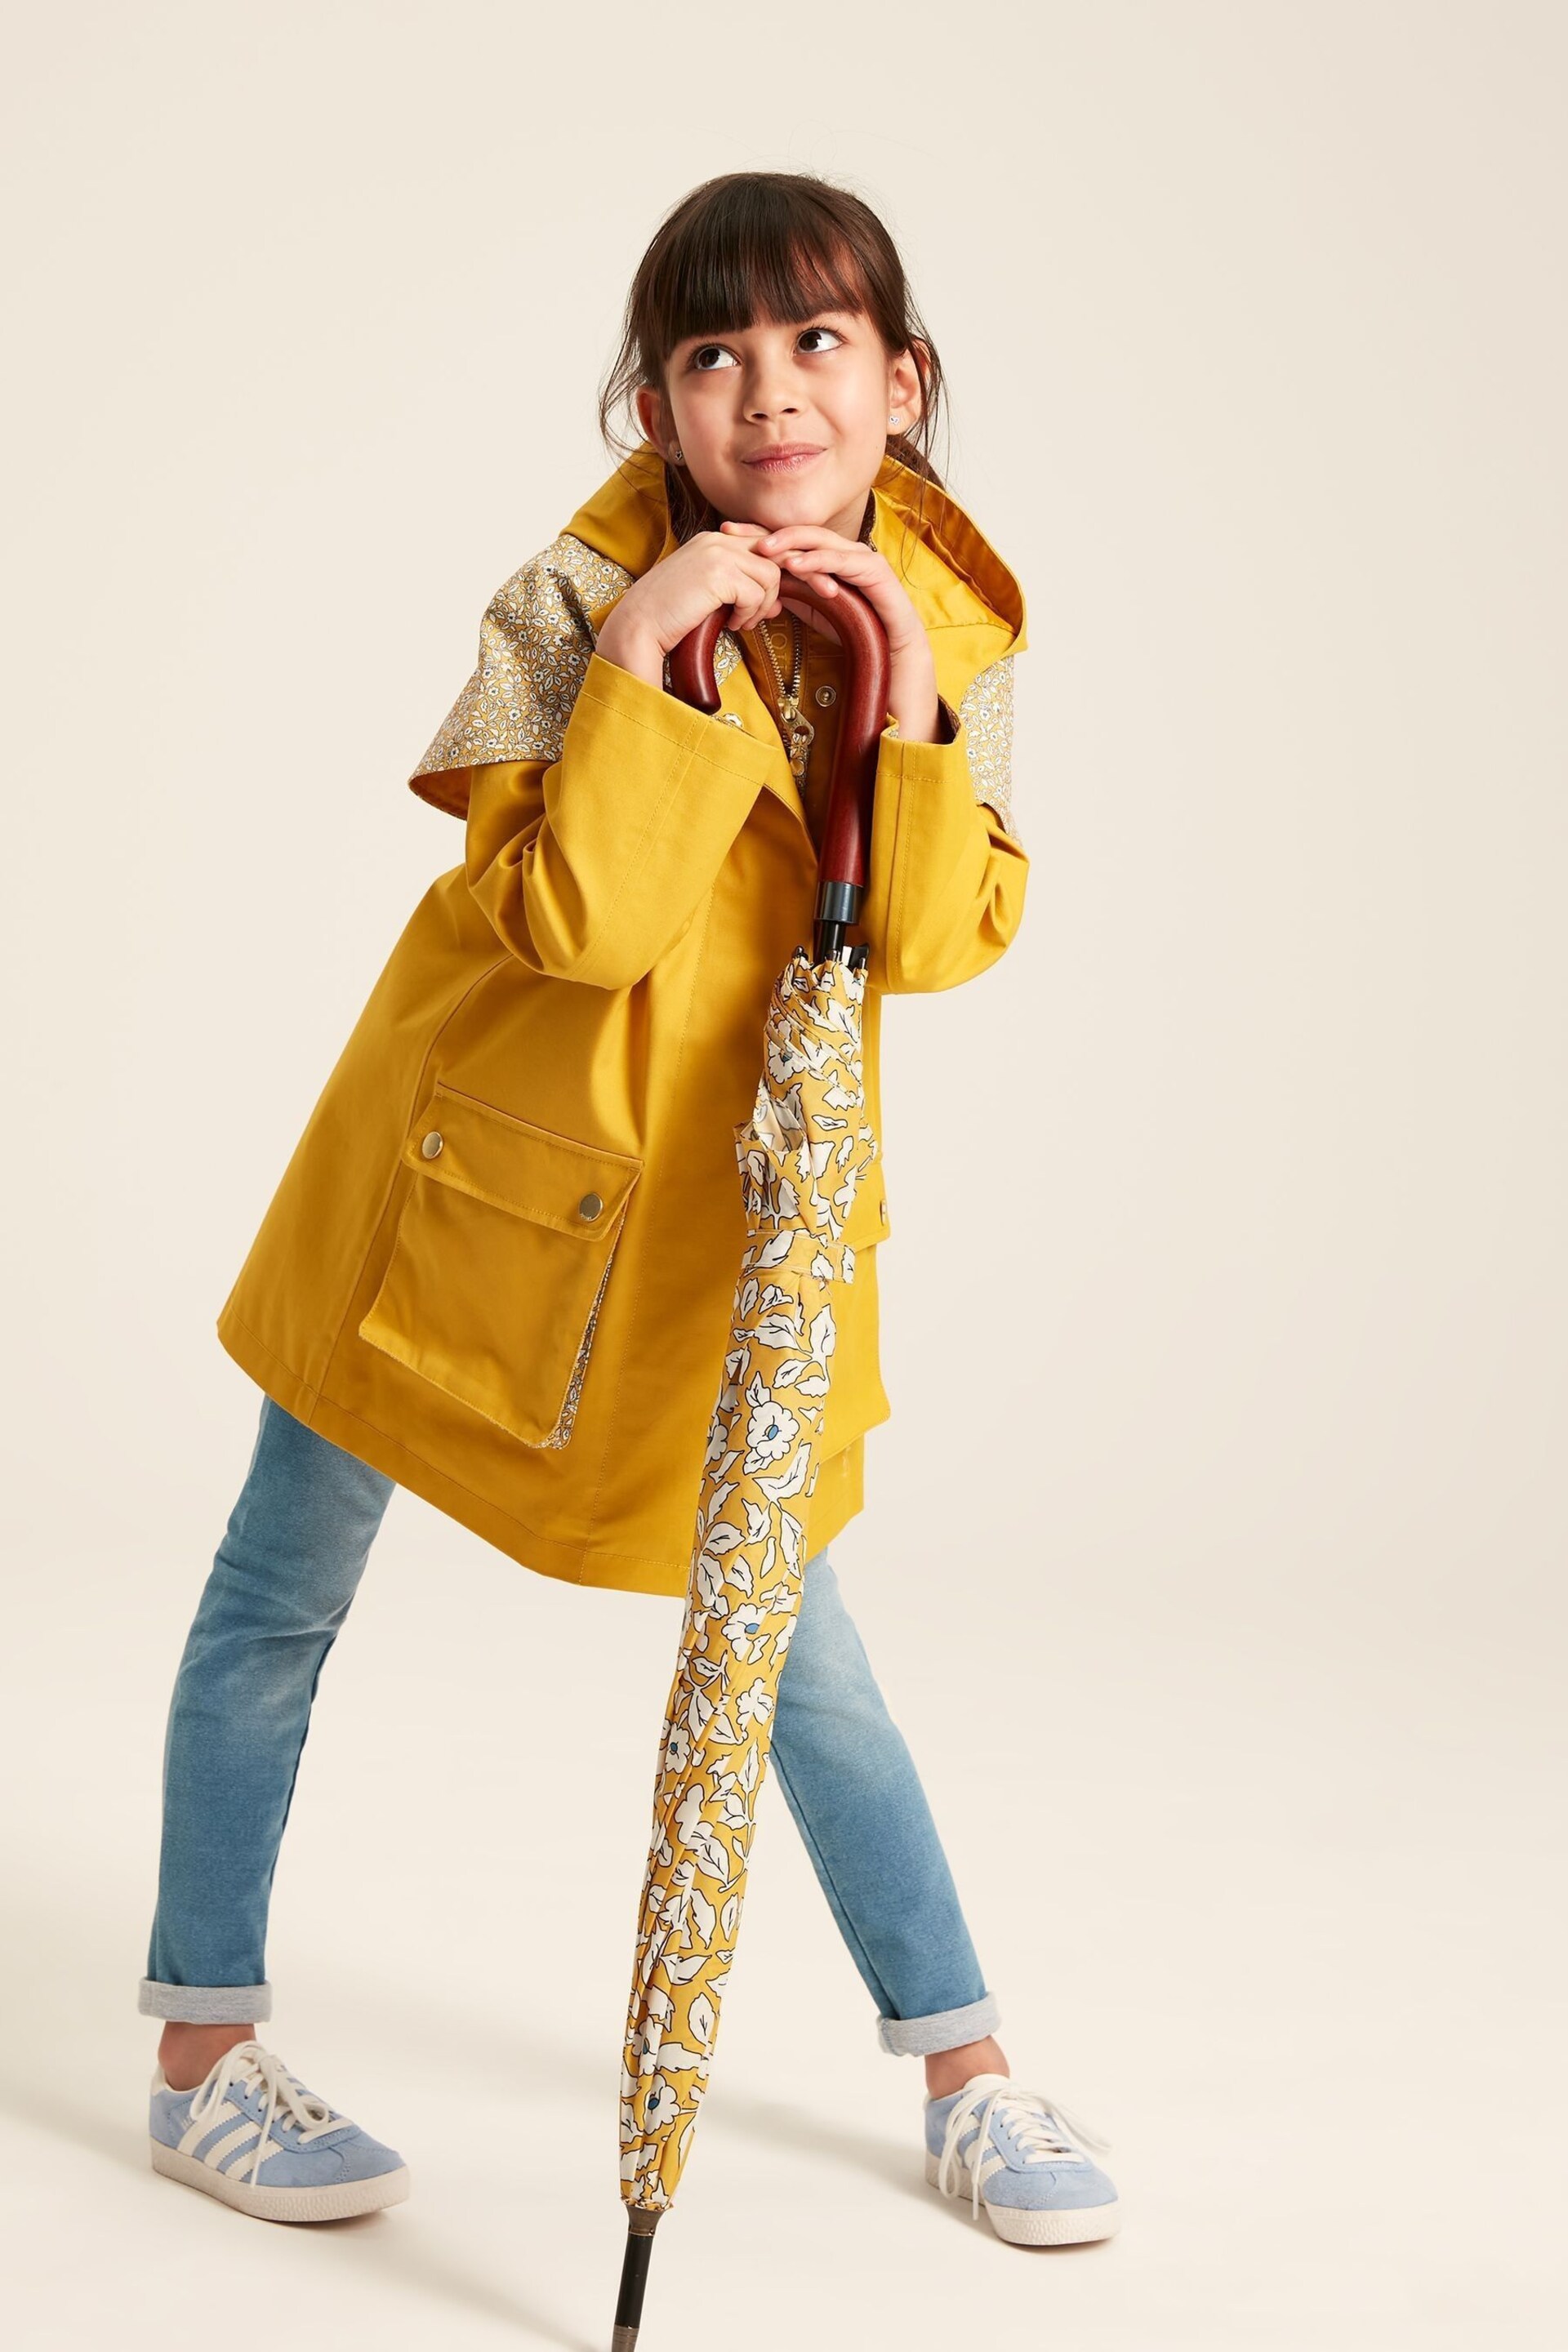 Joules Seacombe Yellow Waterproof Hooded Raincoat with Cape - Image 3 of 13